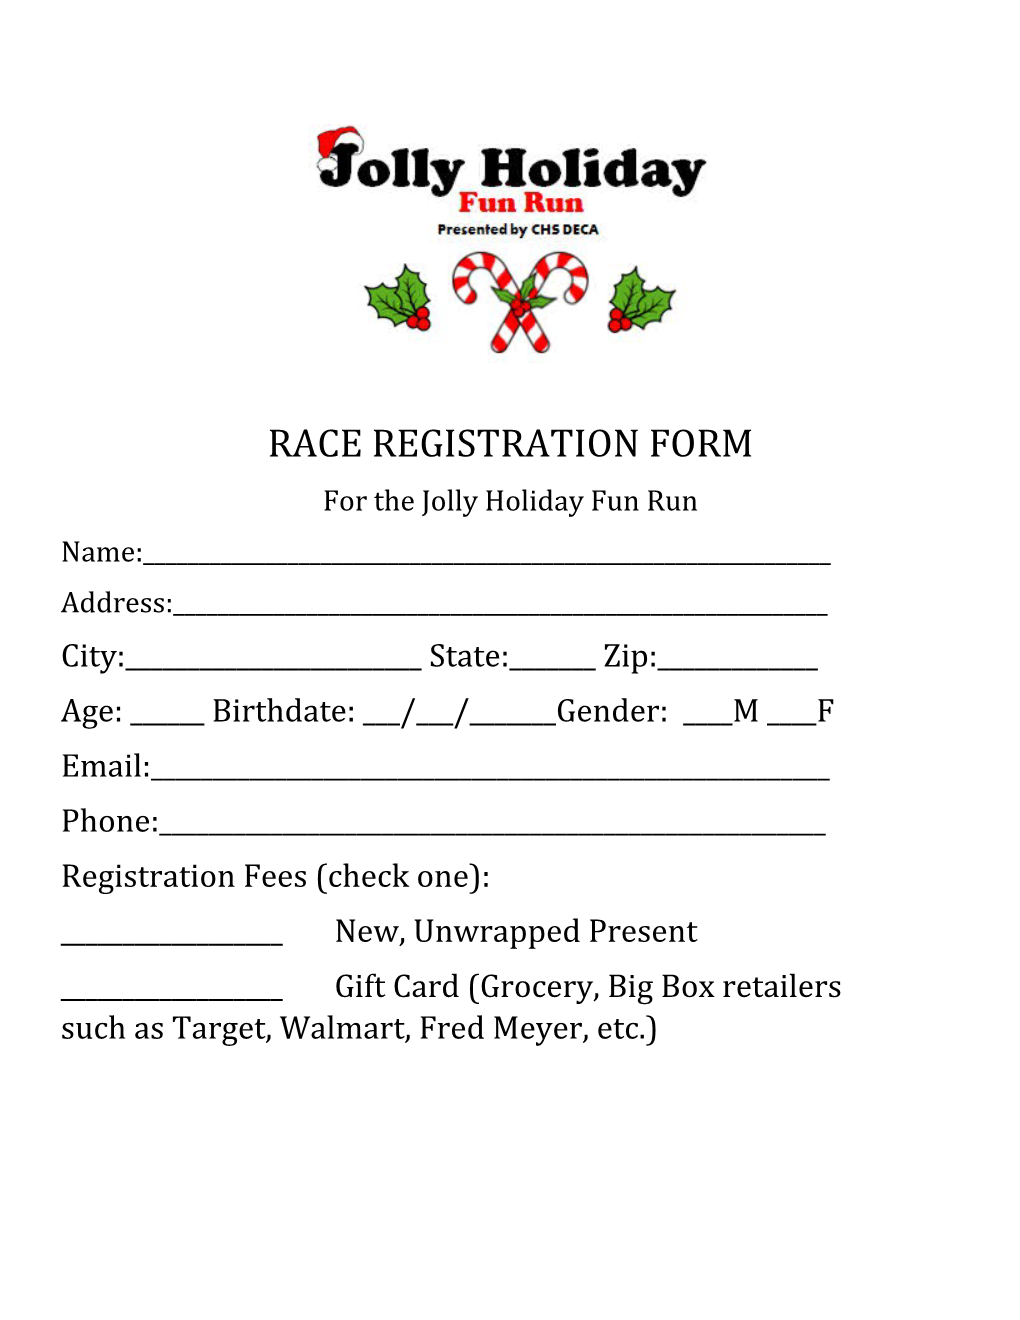 For the Jolly Holiday Fun Run